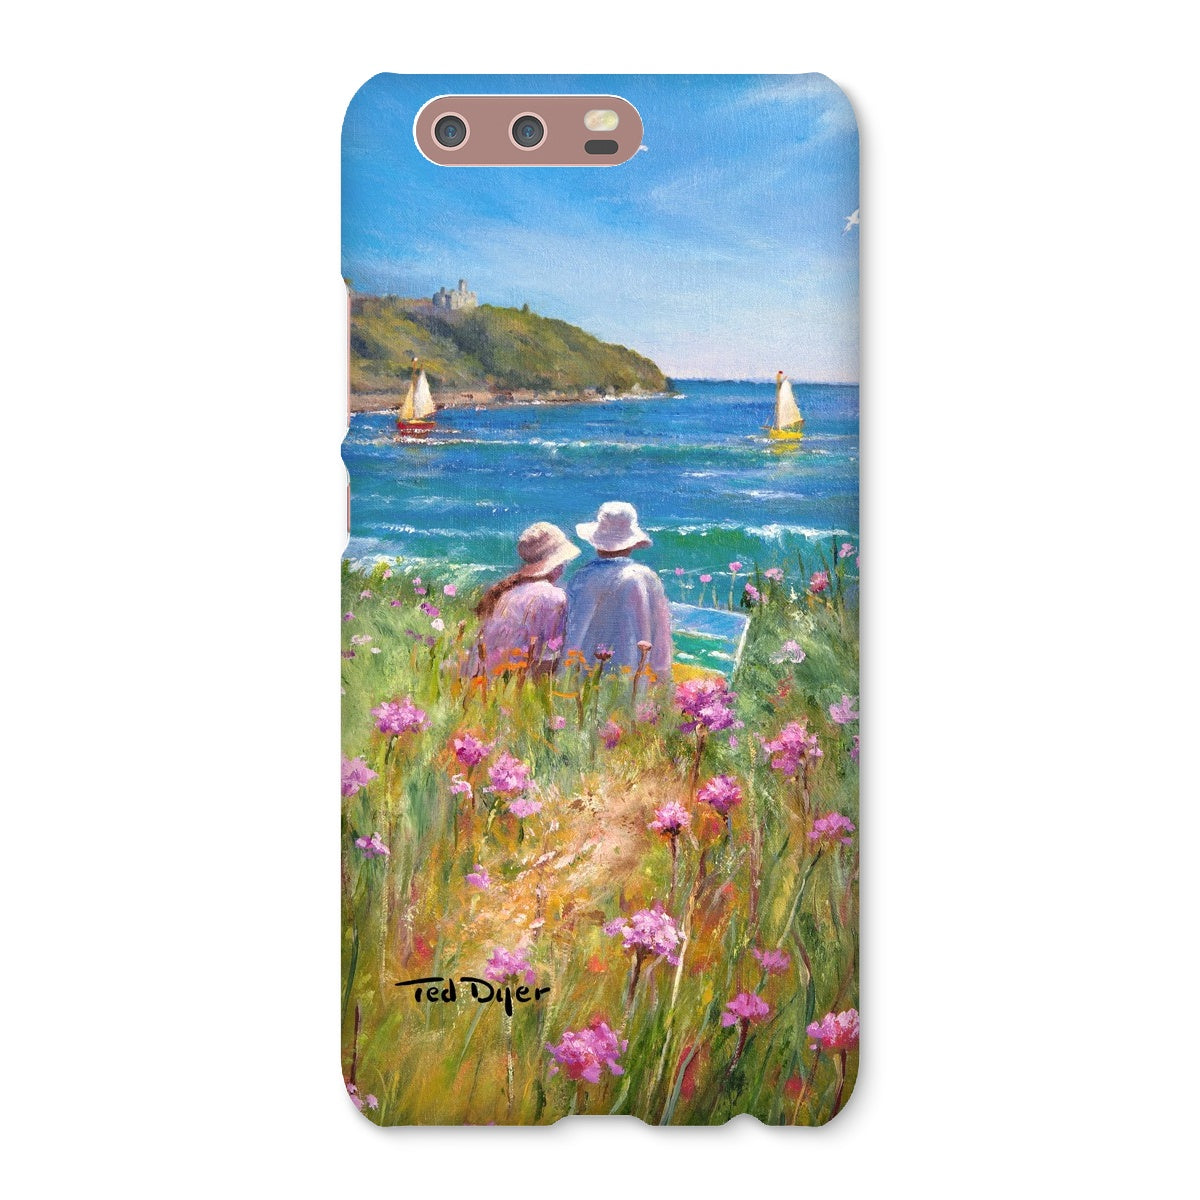 Snap Art Phone Case. Sea Pinks and Painters, Falmouth. Artist Ted Dyer. Cornwall Art Gallery